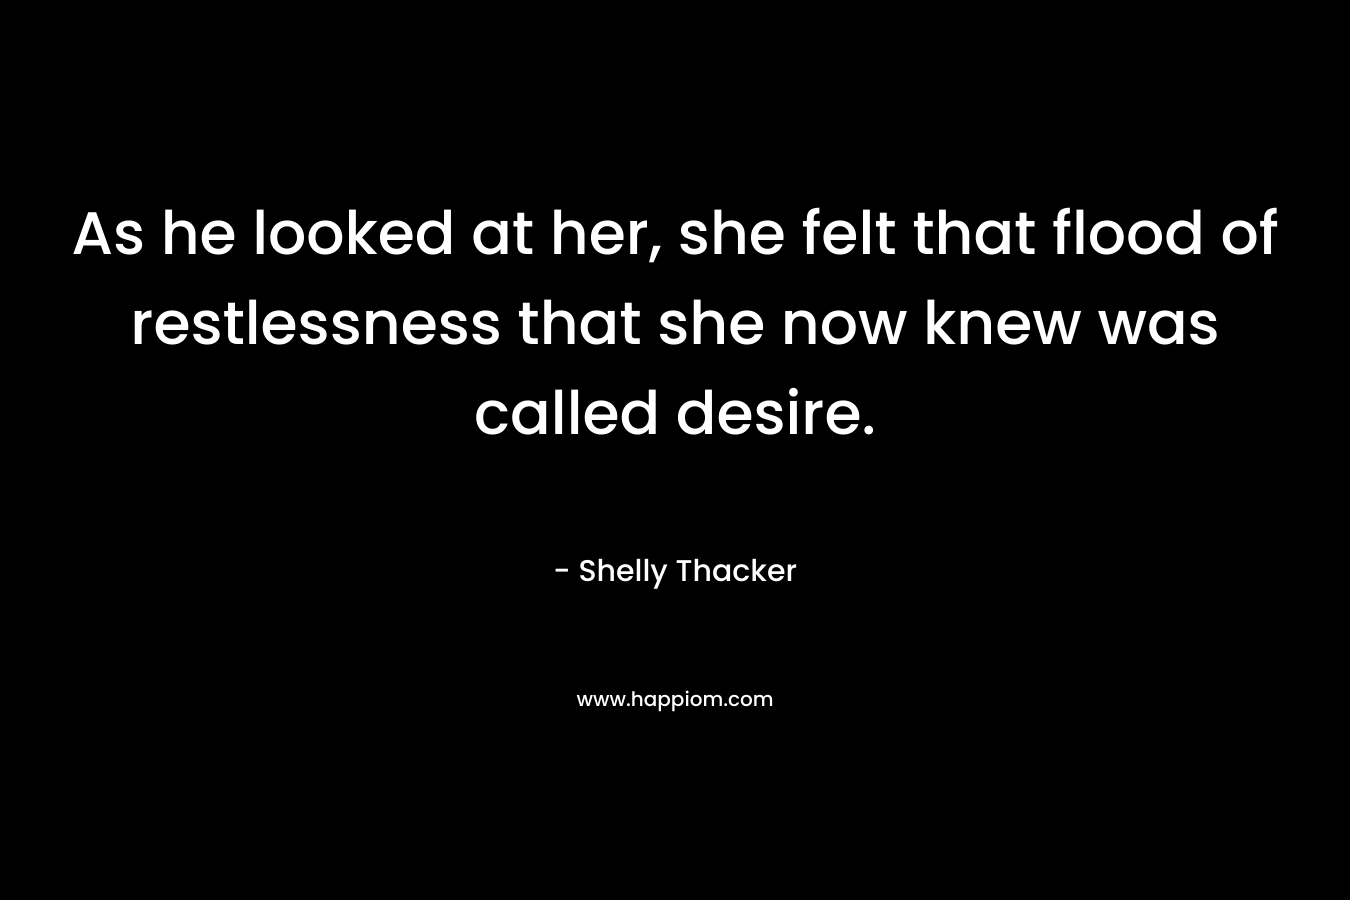 As he looked at her, she felt that flood of restlessness that she now knew was called desire. – Shelly Thacker